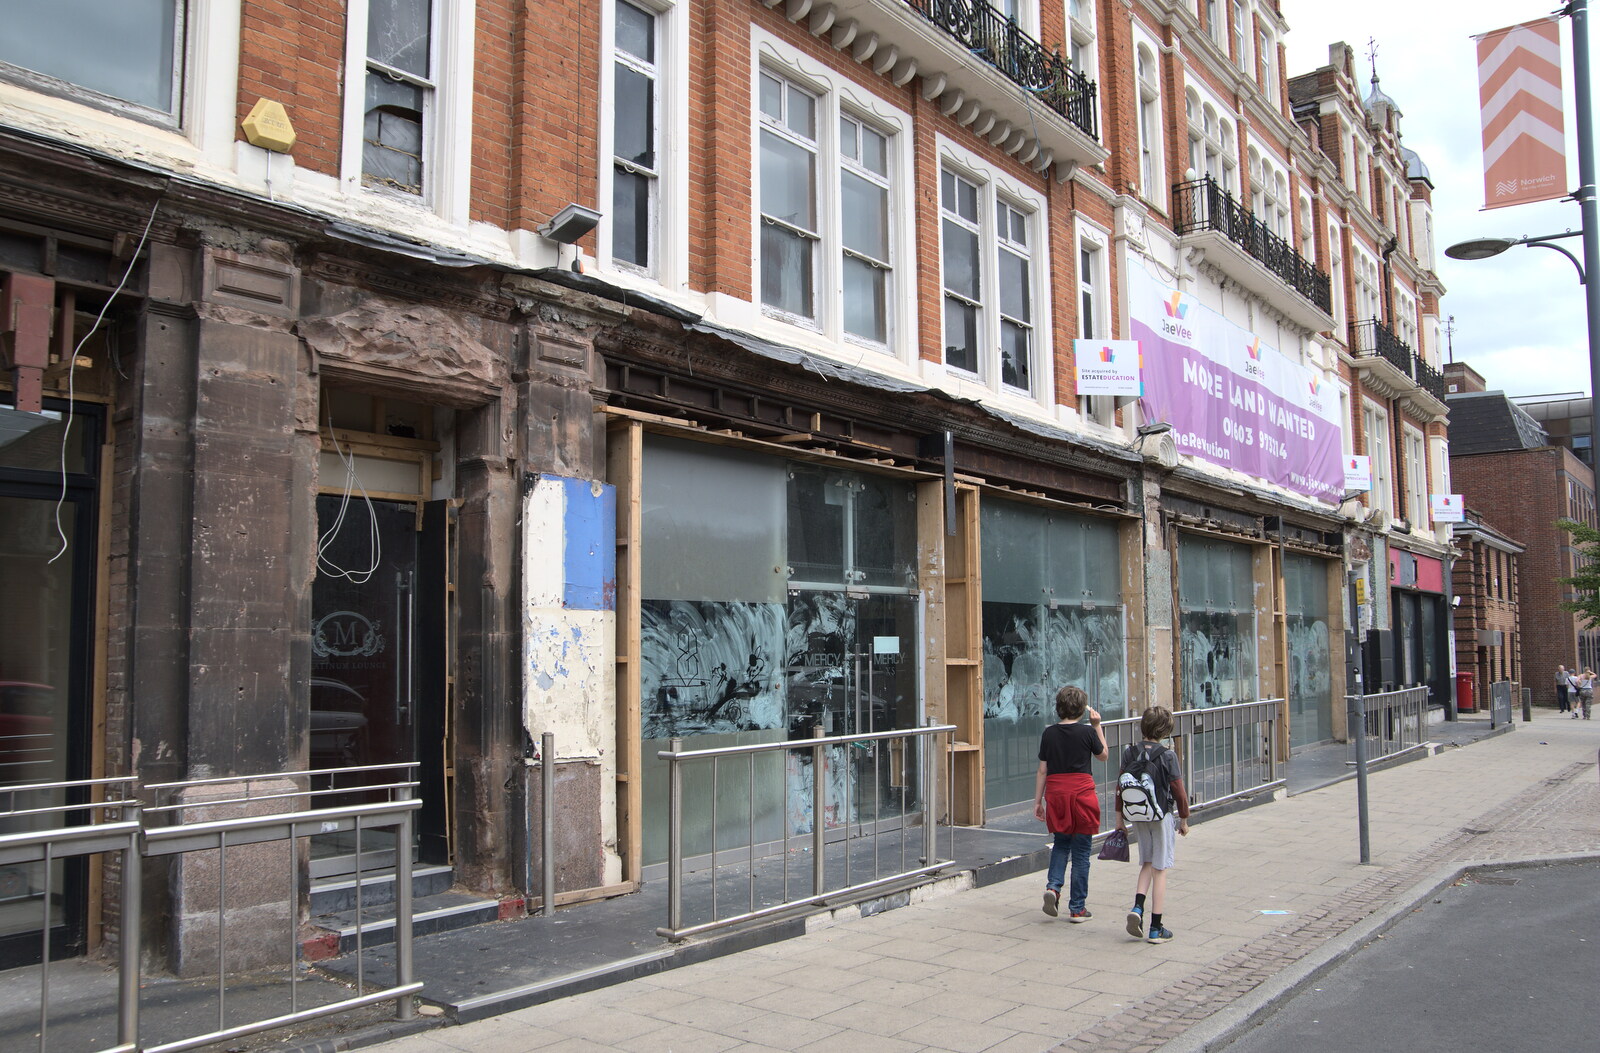 Lunch at Yo! Sushi, Norwich, Norfolk - 19th June 2022: Building restoration on Prince of Wales Road